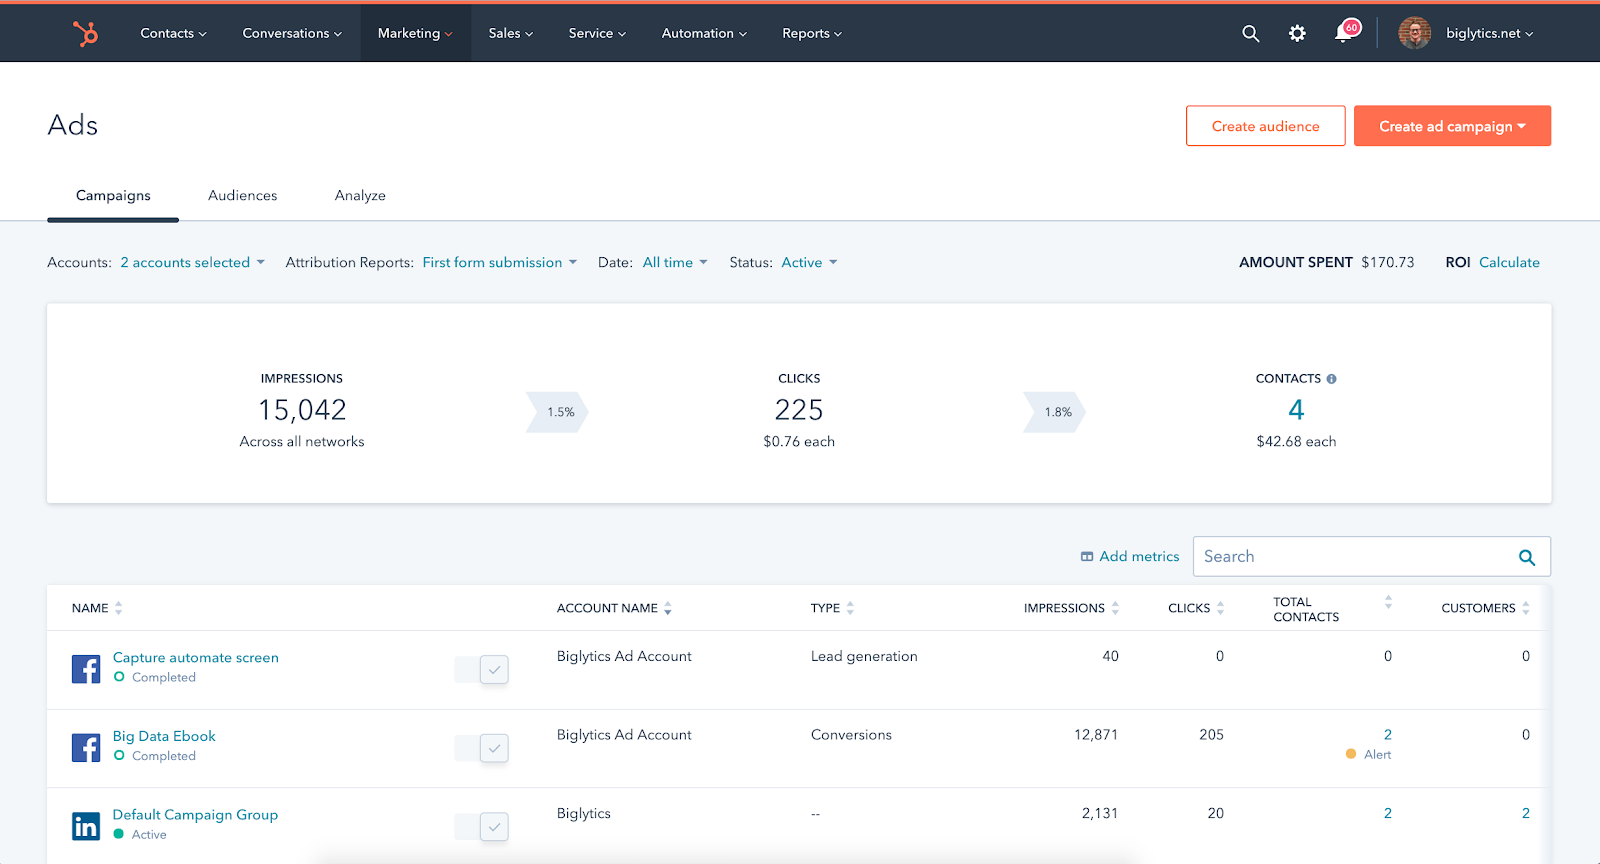 Free Ads Tools Now Available In HubSpot CRM